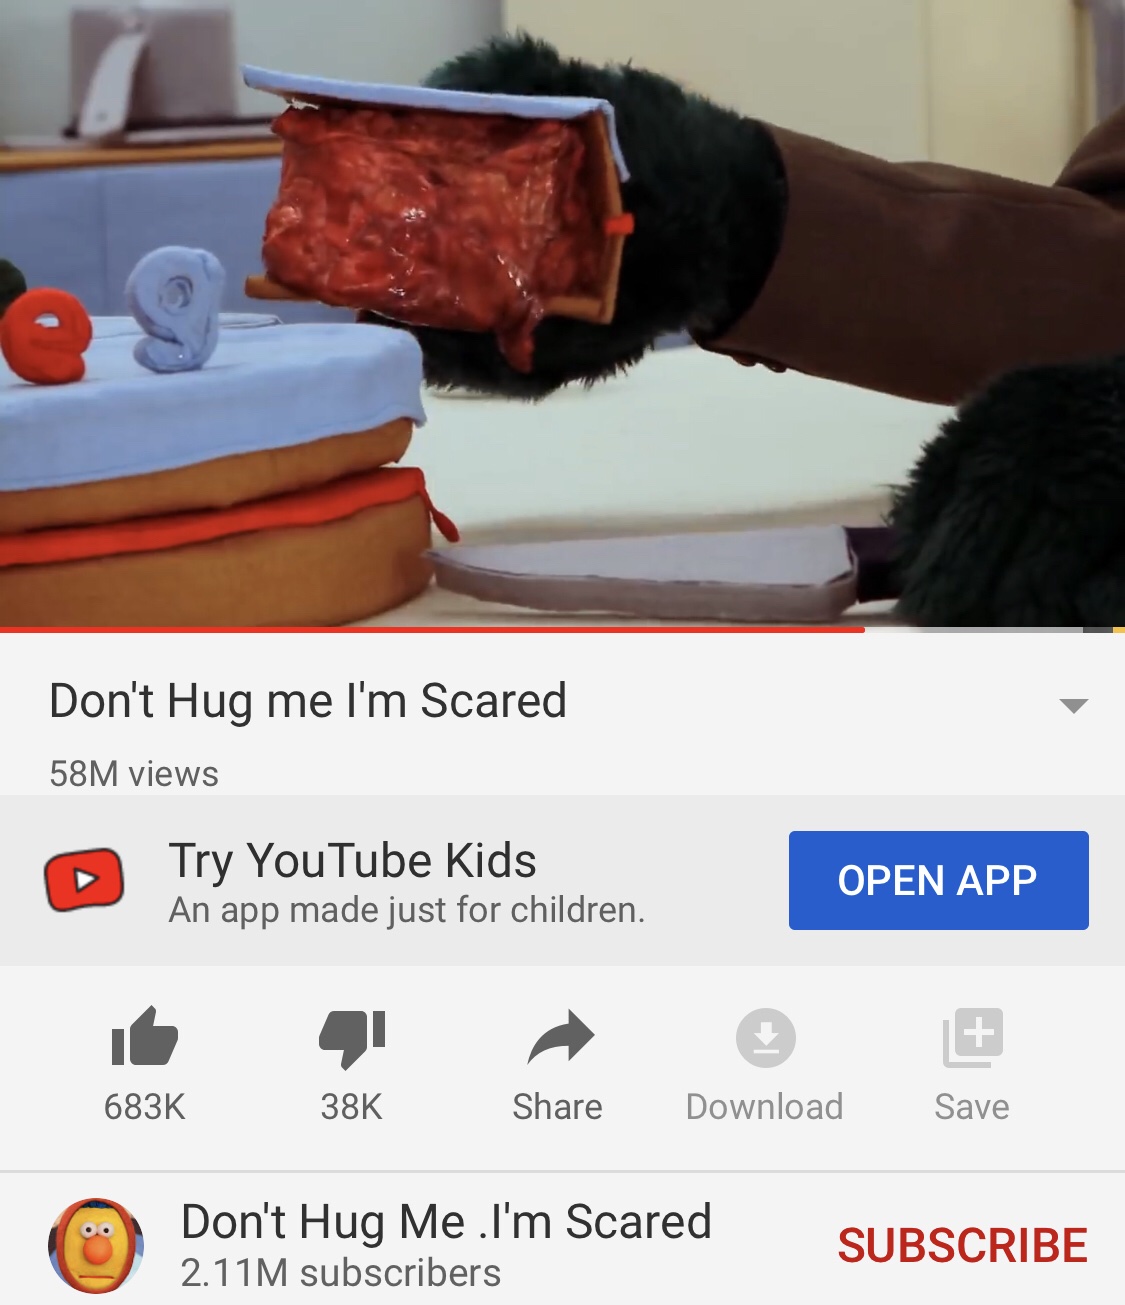 Don’t Hug me I’m Scared is a surreal horror-comedy video which features puppets and gruesome imagery including a cake made from internal organs (YouTube - <a href="https://www.youtube.com/watch?v=9C_HReR_McQ">Don’t Hug me, I’m Scared</a>)